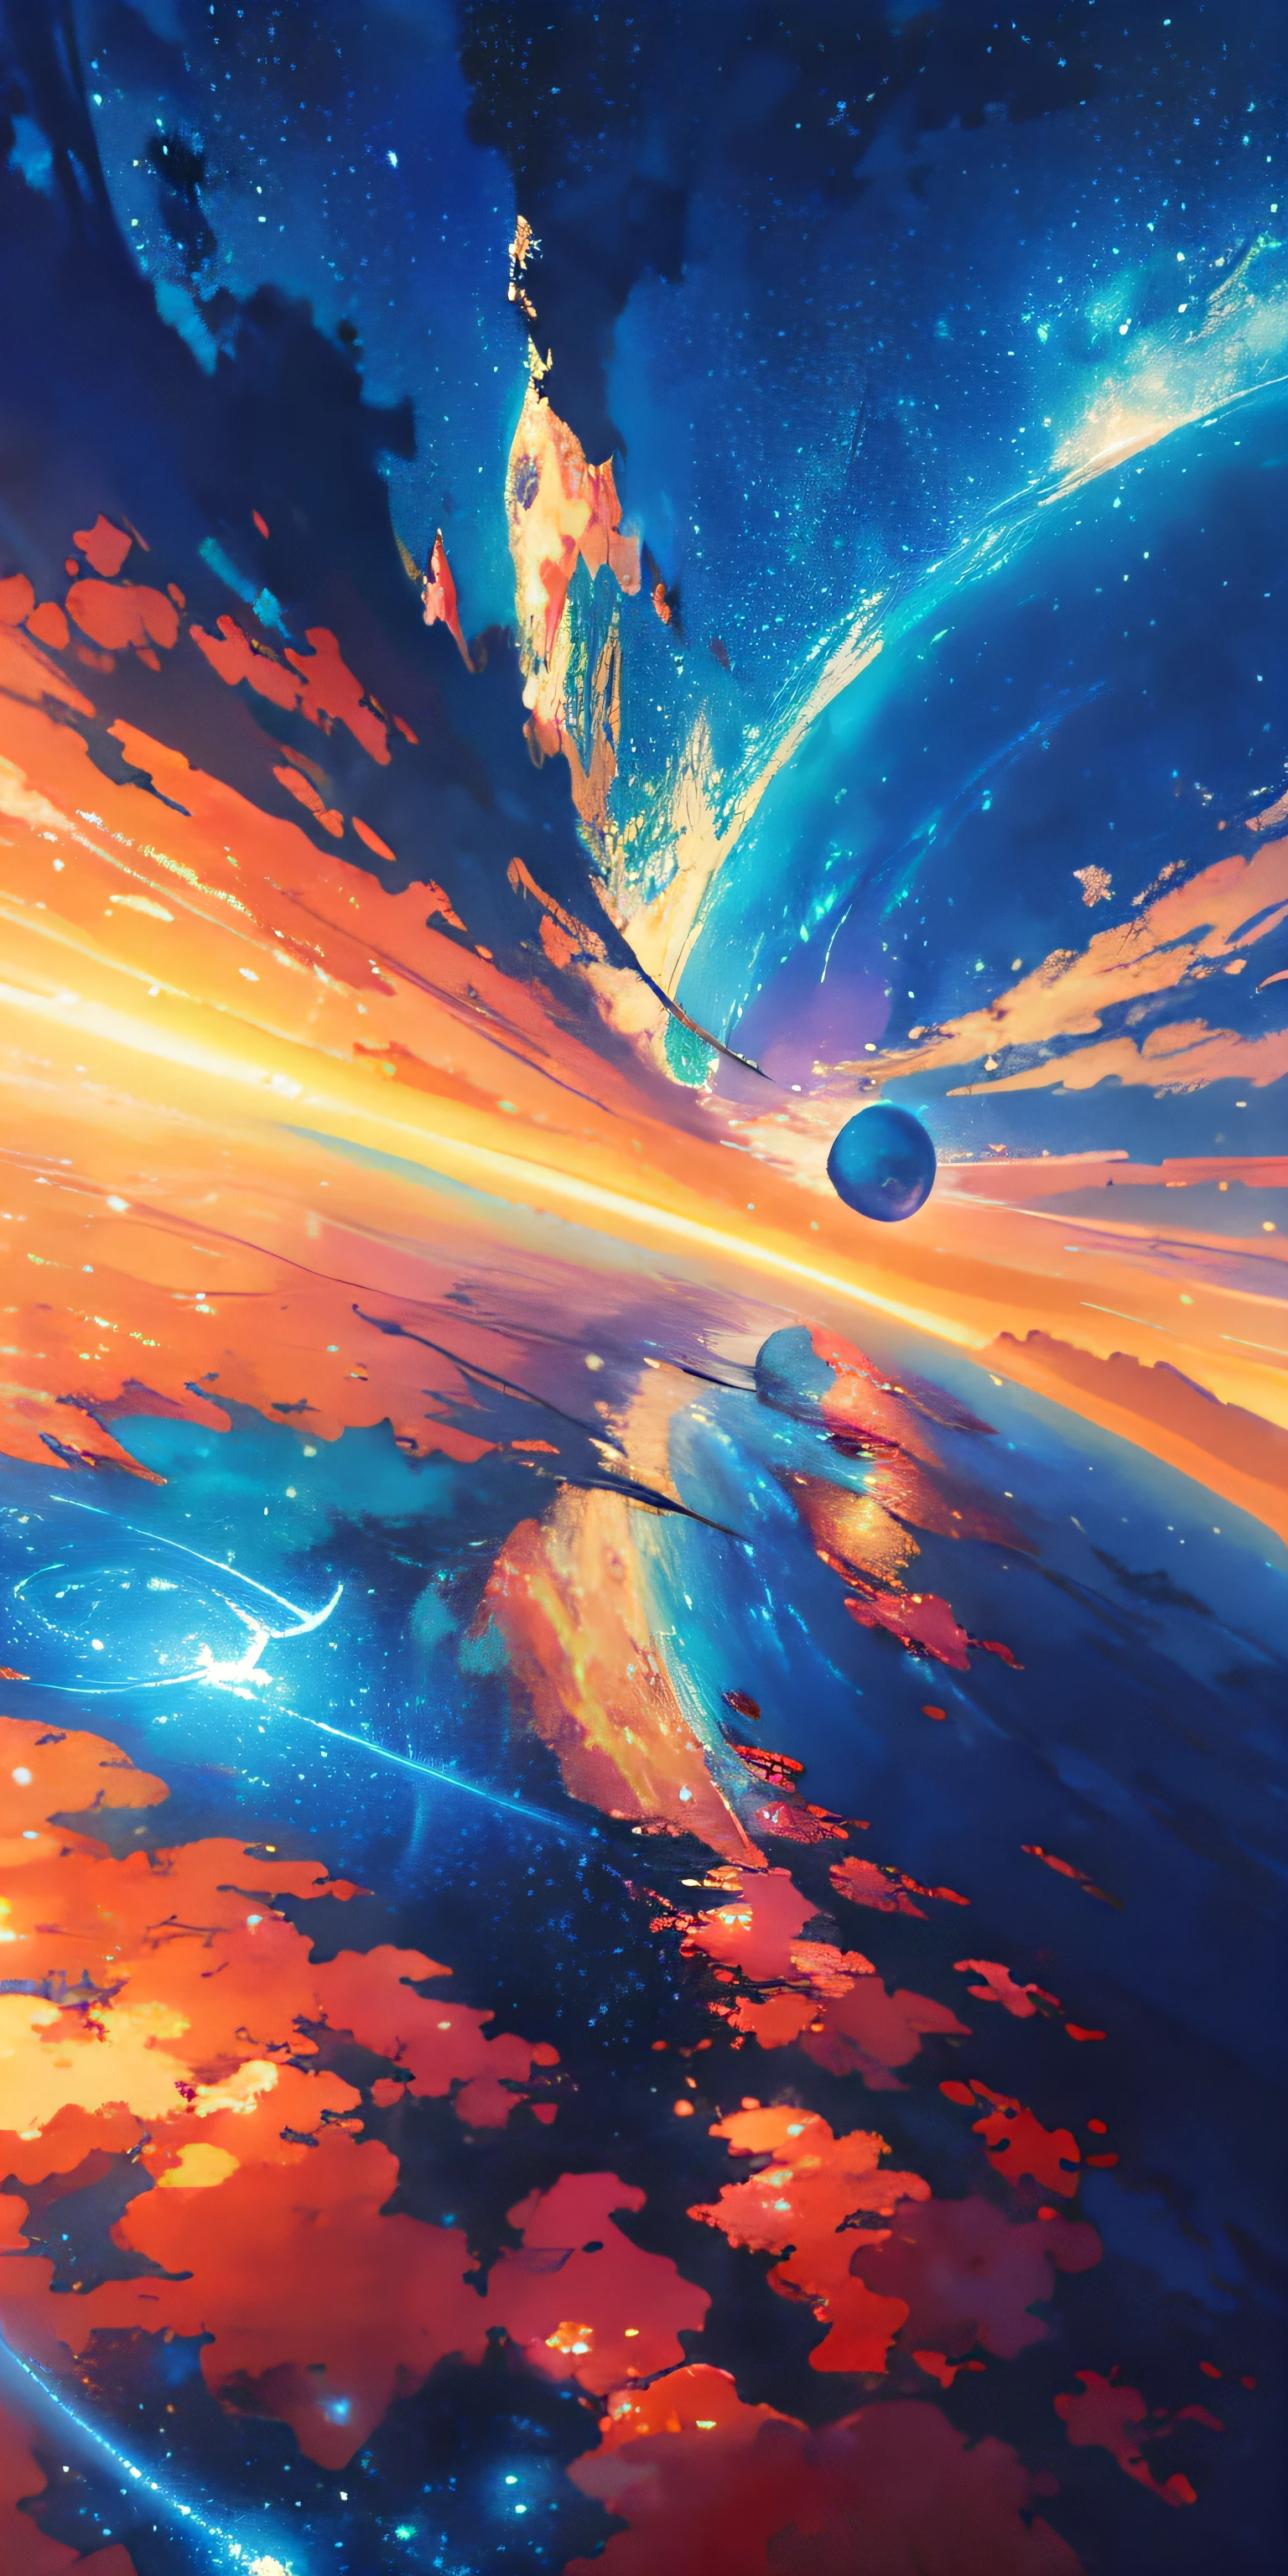 Animated scene of a planet with stars in the sky, cosmic sky. by makoto shinkai, endless cosmos in the background, Beautiful space, makoto shinkai cyril rolando, a beautiful artwork illustration, 4K highly detailed digital art, heaven planet in background, anime art wallpaper 4k, anime art wallpaper 4k, amazing wallpapers, Fantasy space,hasten、The universe is changing,The color gradually turns blue、Image of peace